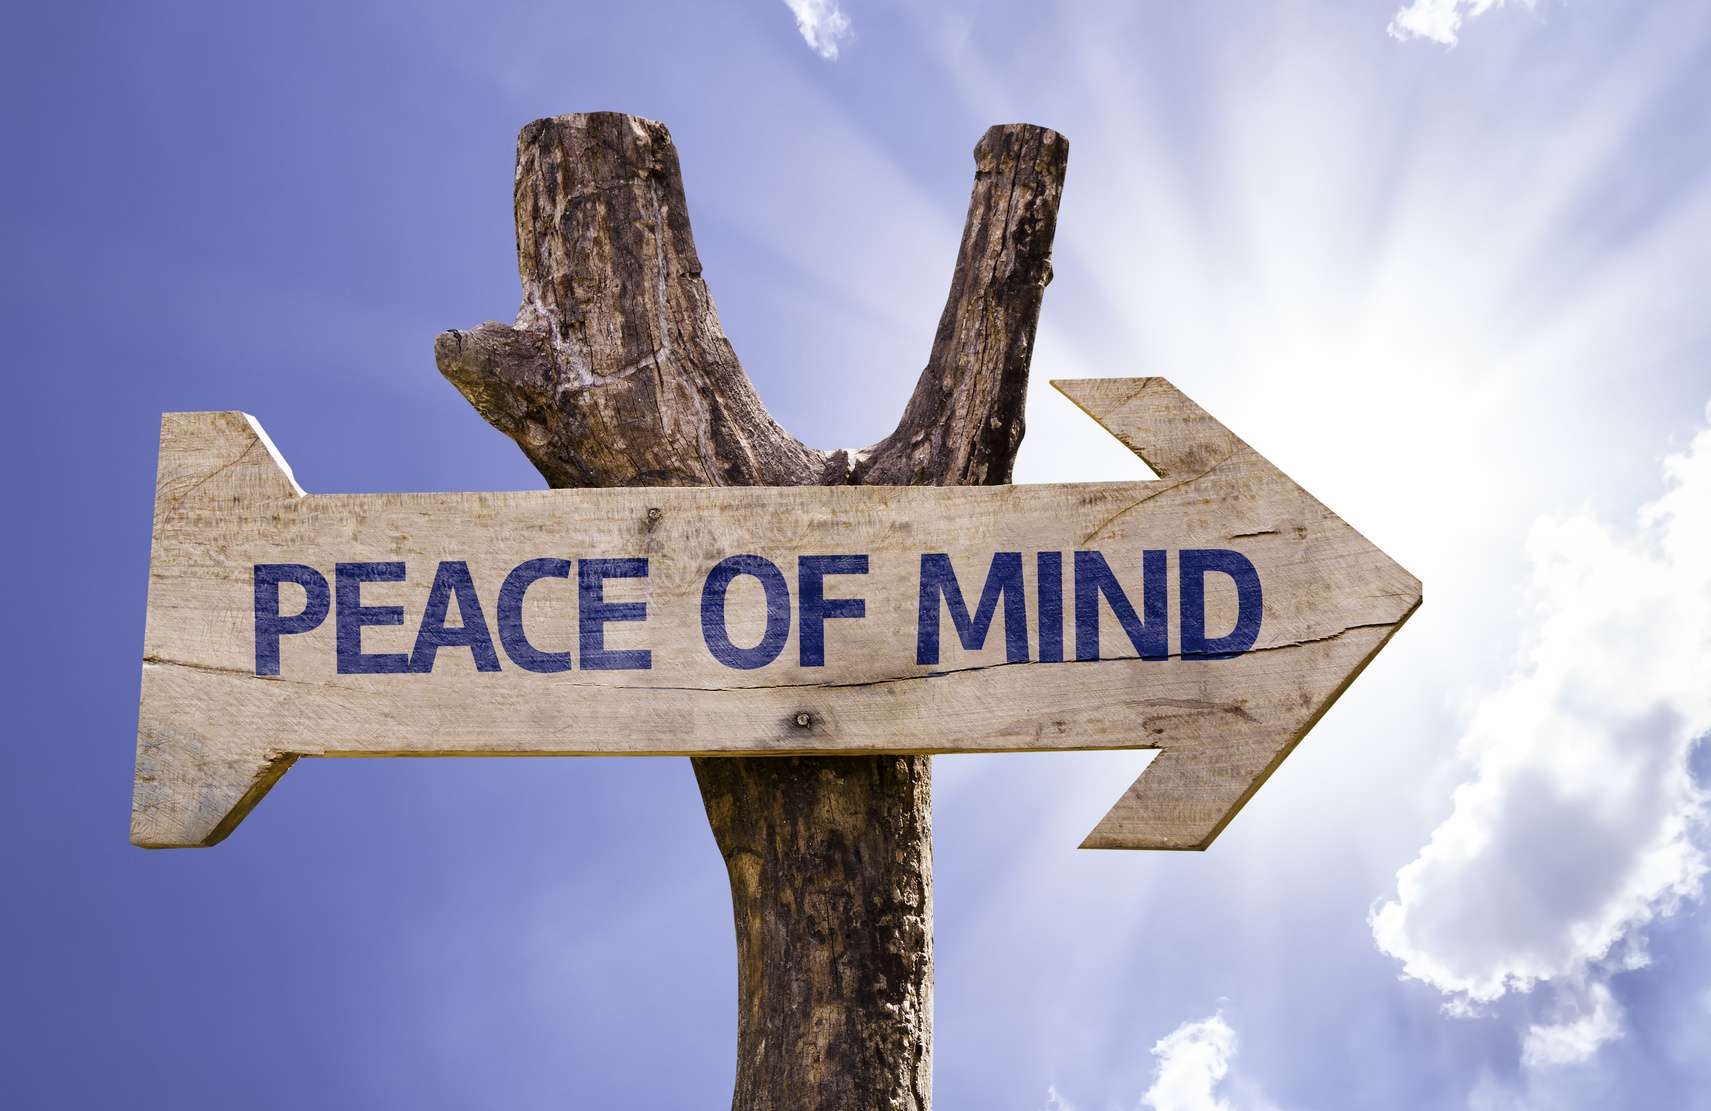 Peace of Mind wooden sign with a sky background